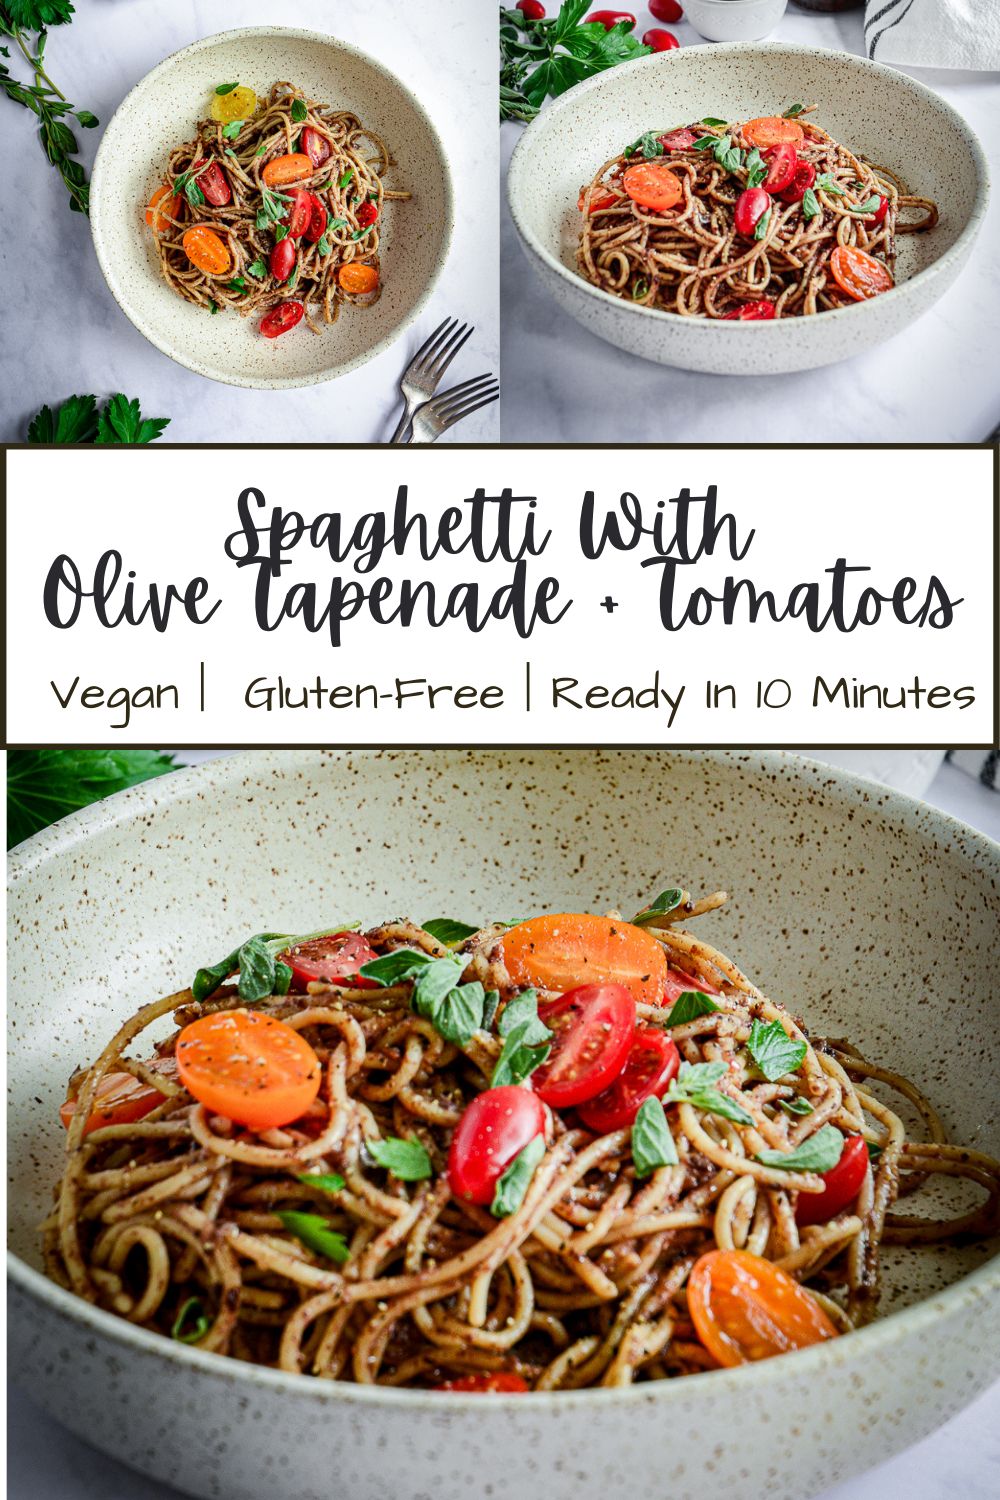 Spaghetti with Olive Tapenade, Tomatoes, and Herbs - Calm Eats